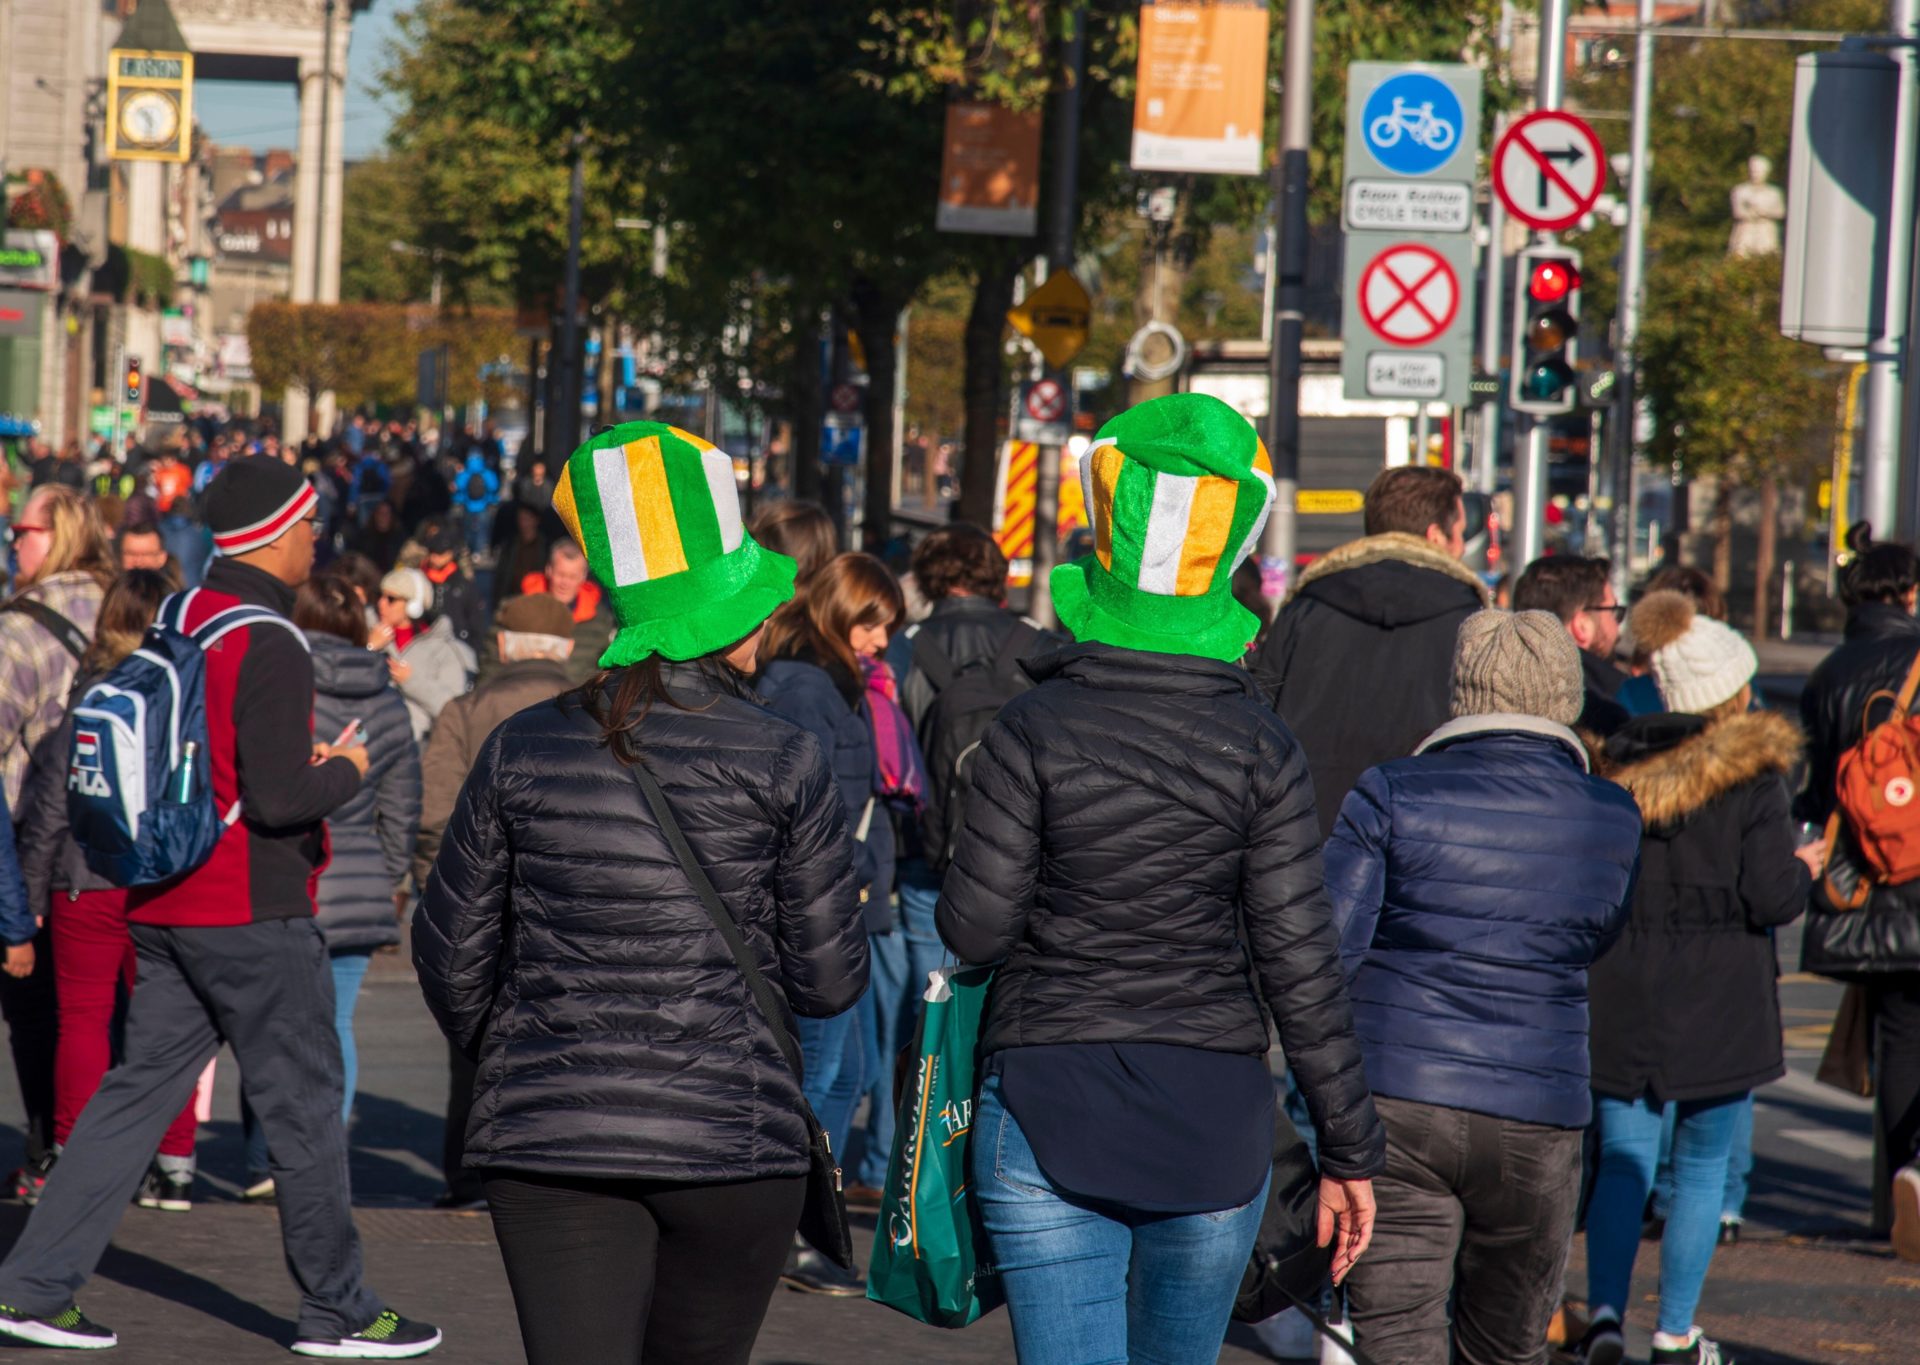 'Taken by surprise' - What do tourists really think of Ireland?